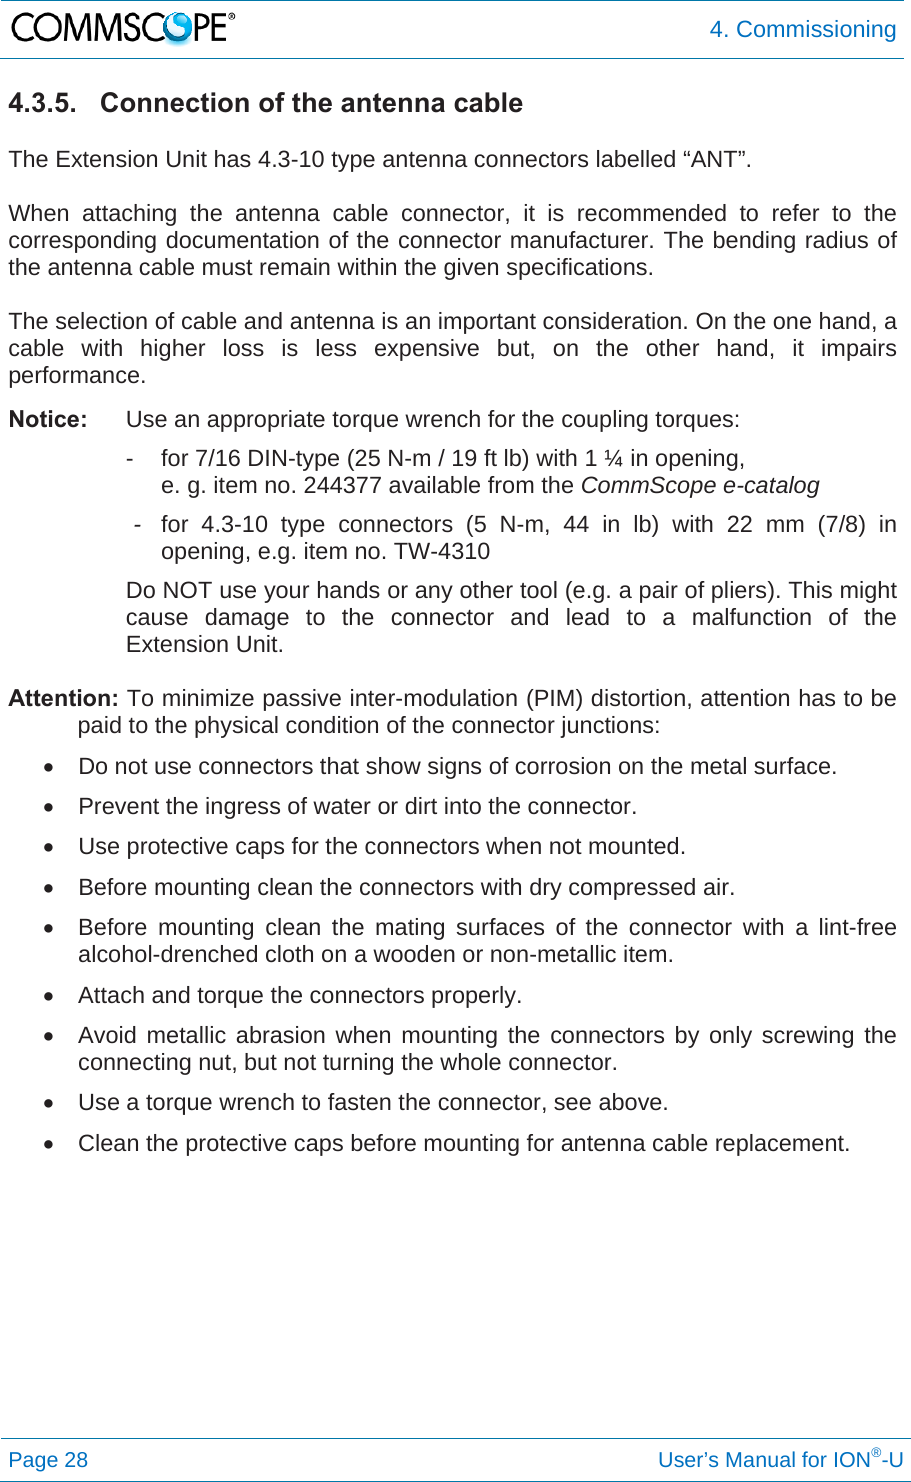  4. Commissioning Page 28     User’s Manual for ION®-U 4.3.5.  Connection of the antenna cable  The Extension Unit has 4.3-10 type antenna connectors labelled “ANT”.  When attaching the antenna cable connector, it is recommended to refer to the corresponding documentation of the connector manufacturer. The bending radius of the antenna cable must remain within the given specifications.  The selection of cable and antenna is an important consideration. On the one hand, a cable with higher loss is less expensive but, on the other hand, it impairs performance.  Notice:  Use an appropriate torque wrench for the coupling torques:   -  for 7/16 DIN-type (25 N-m / 19 ft lb) with 1 ¼ in opening,       e. g. item no. 244377 available from the CommScope e-catalog  - for 4.3-10 type connectors (5 N-m, 44 in lb) with 22 mm (7/8) in opening, e.g. item no. TW-4310 Do NOT use your hands or any other tool (e.g. a pair of pliers). This might cause damage to the connector and lead to a malfunction of the Extension Unit.  Attention: To minimize passive inter-modulation (PIM) distortion, attention has to be paid to the physical condition of the connector junctions:   Do not use connectors that show signs of corrosion on the metal surface.   Prevent the ingress of water or dirt into the connector.   Use protective caps for the connectors when not mounted.   Before mounting clean the connectors with dry compressed air.   Before mounting clean the mating surfaces of the connector with a lint-free alcohol-drenched cloth on a wooden or non-metallic item.   Attach and torque the connectors properly.   Avoid metallic abrasion when mounting the connectors by only screwing the connecting nut, but not turning the whole connector.   Use a torque wrench to fasten the connector, see above.   Clean the protective caps before mounting for antenna cable replacement.    